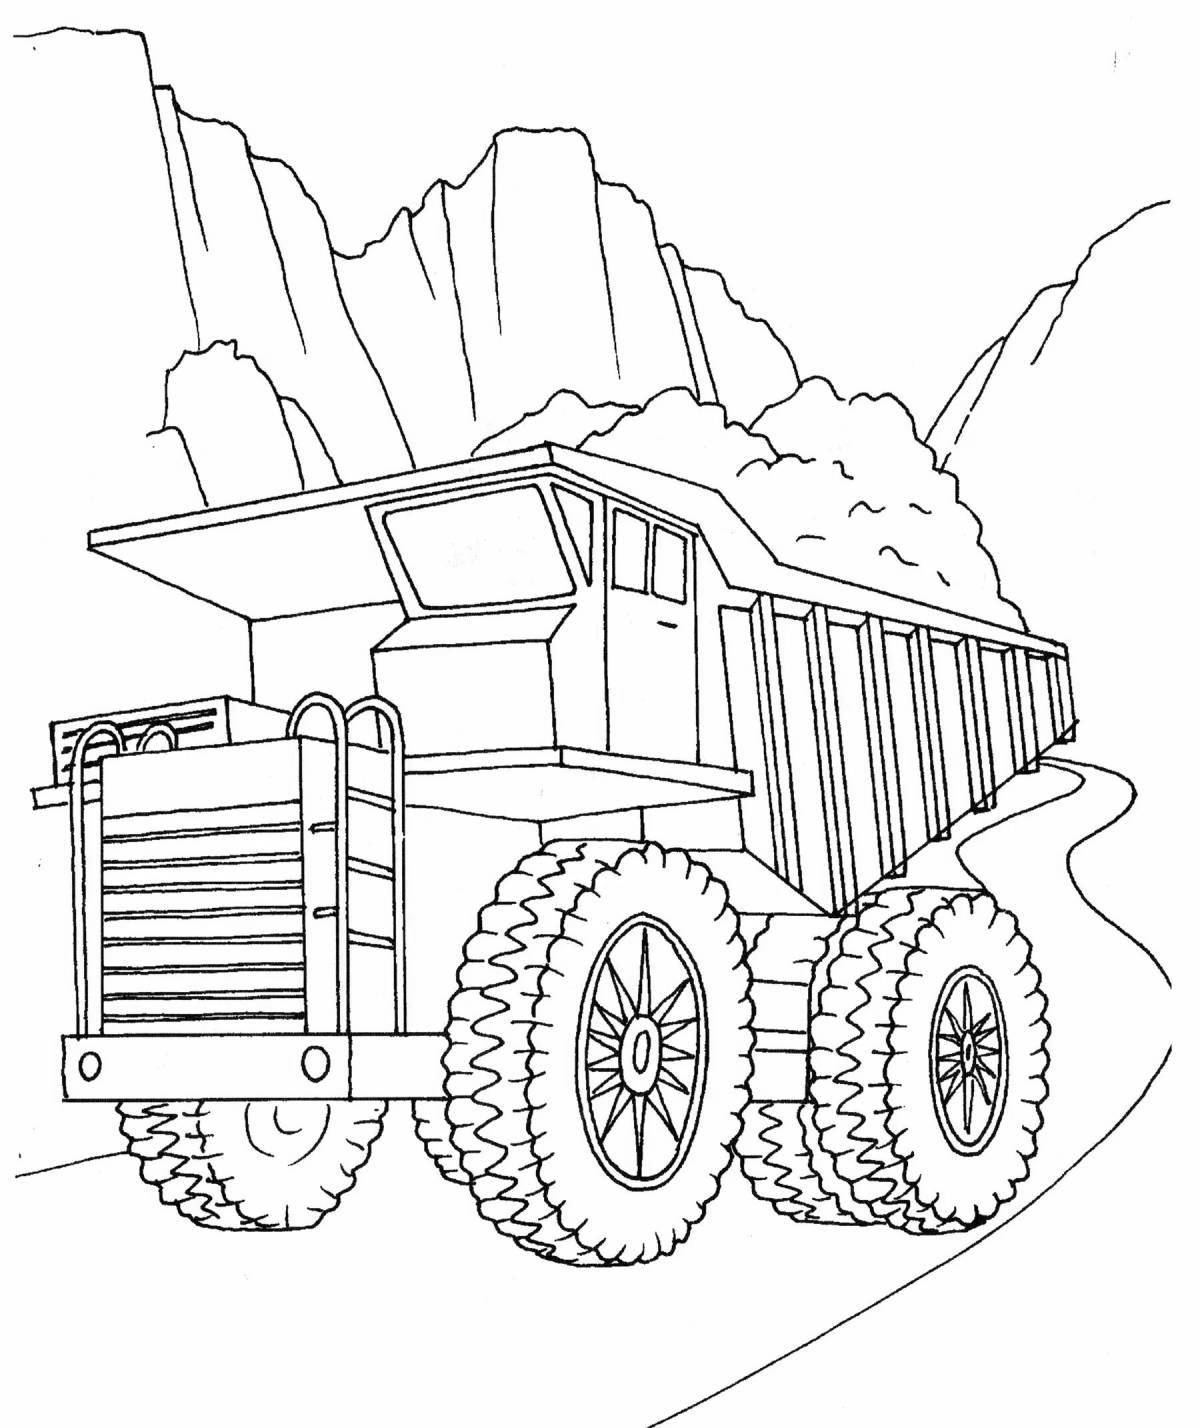 Colourful dump truck coloring book